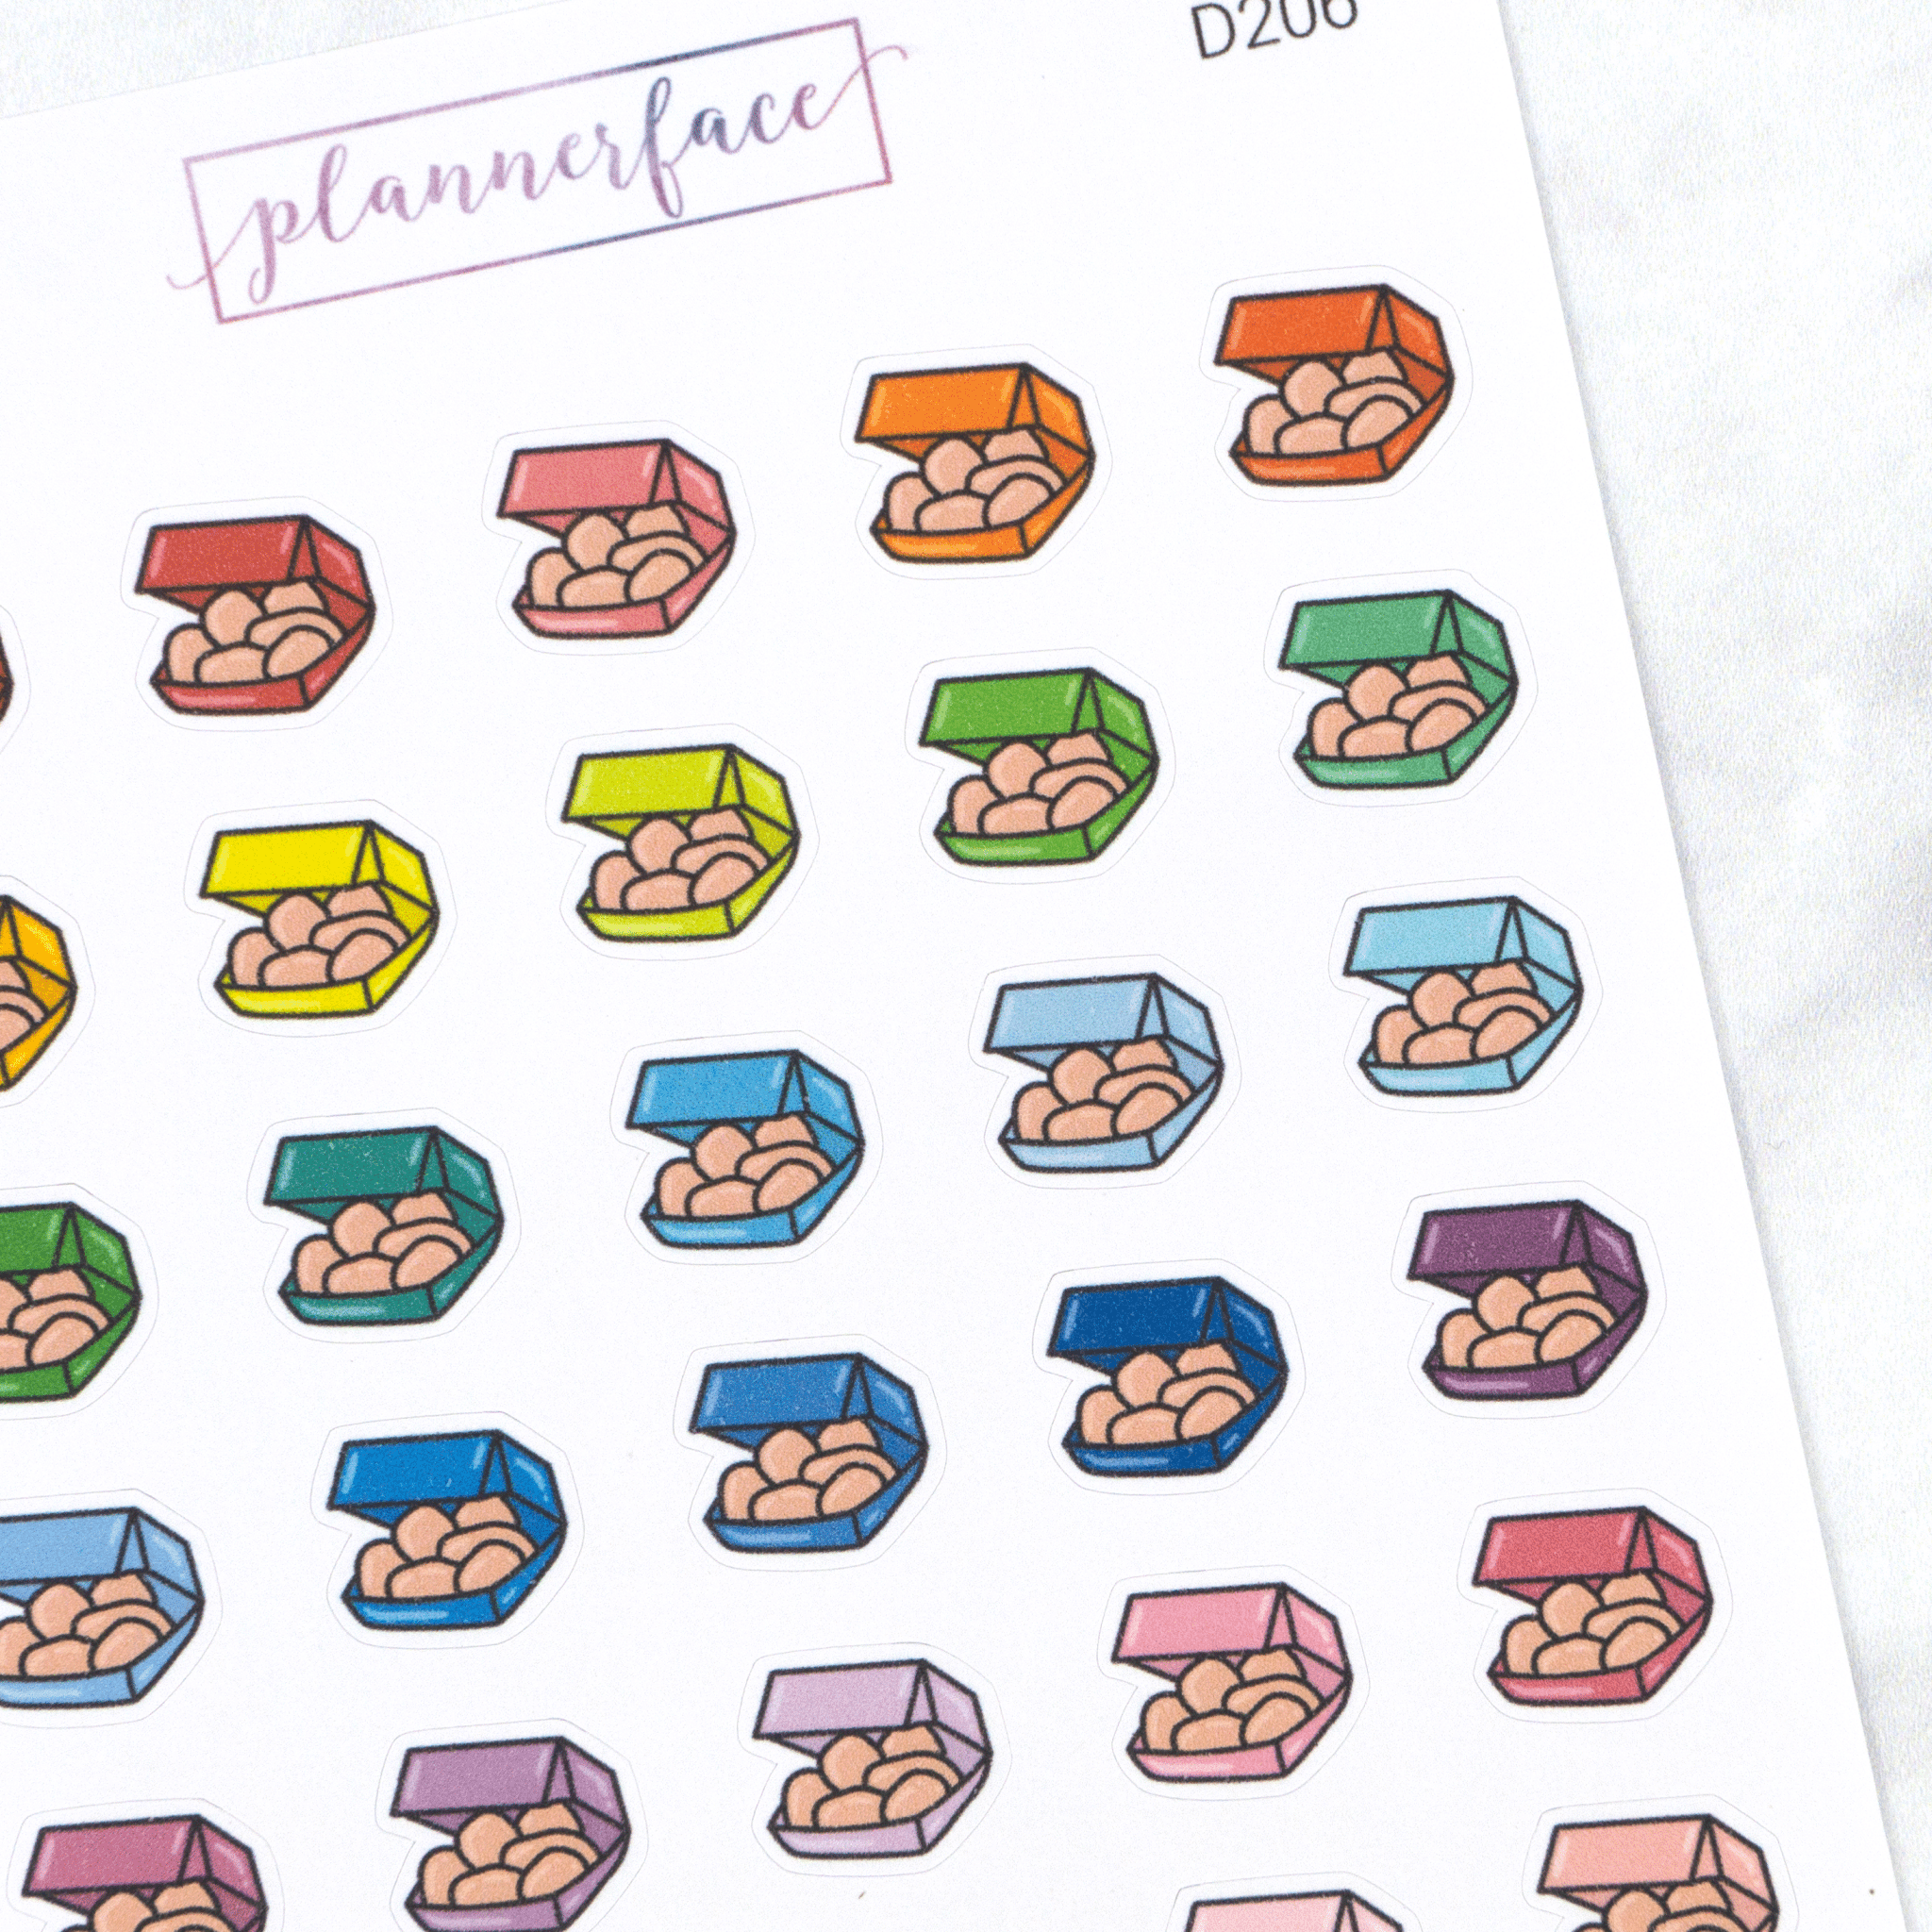 Chicken Nuggets Multicolour Doodles by Plannerface